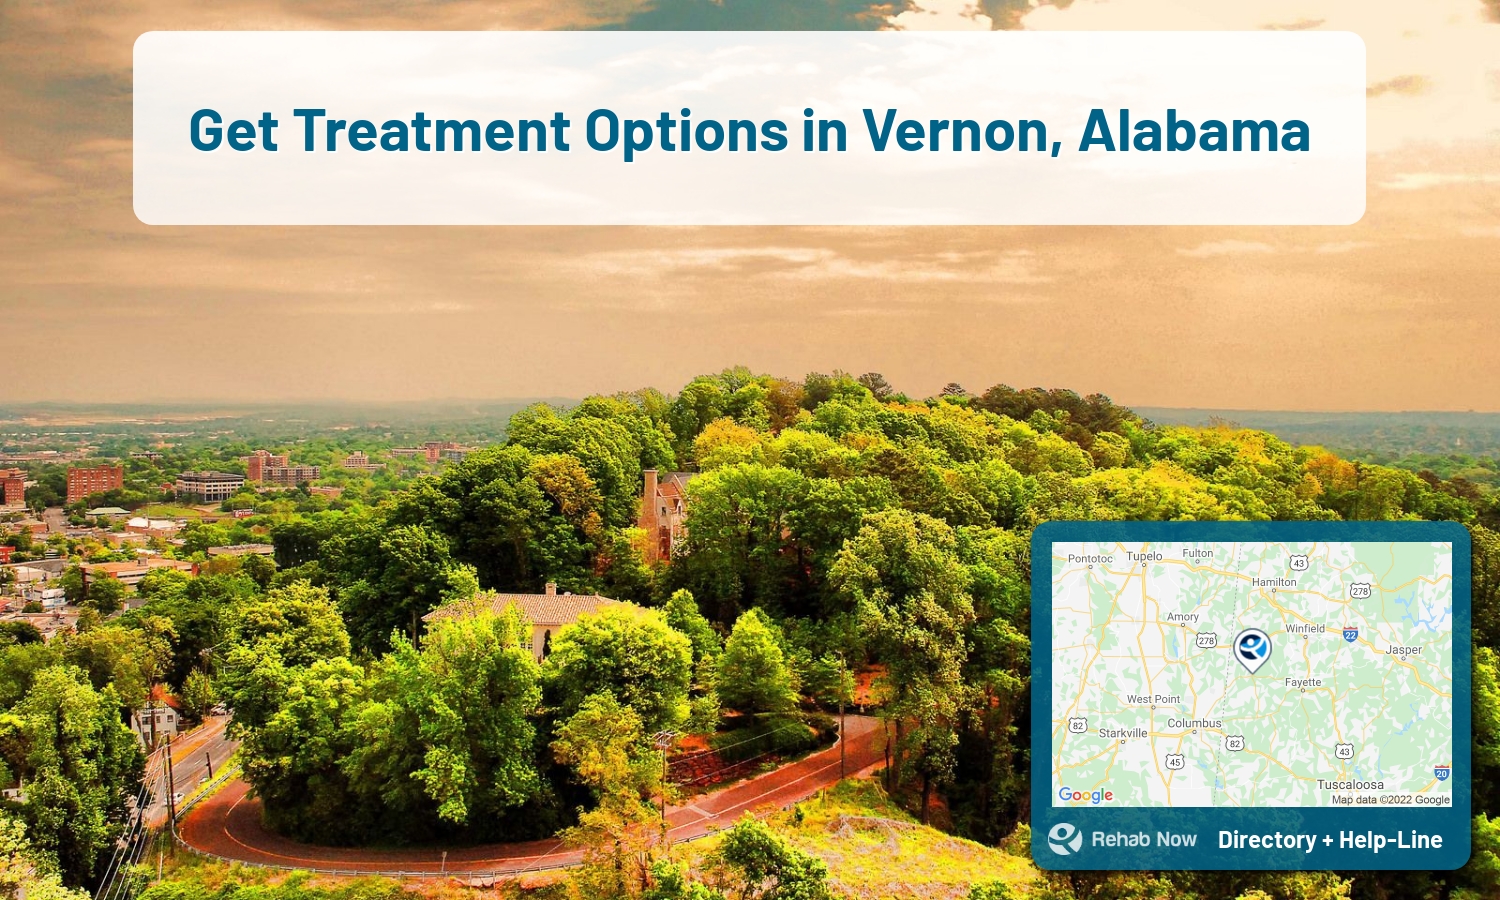 Need treatment nearby in Vernon, Alabama? Choose a drug/alcohol rehab center from our list, or call our hotline now for free help.